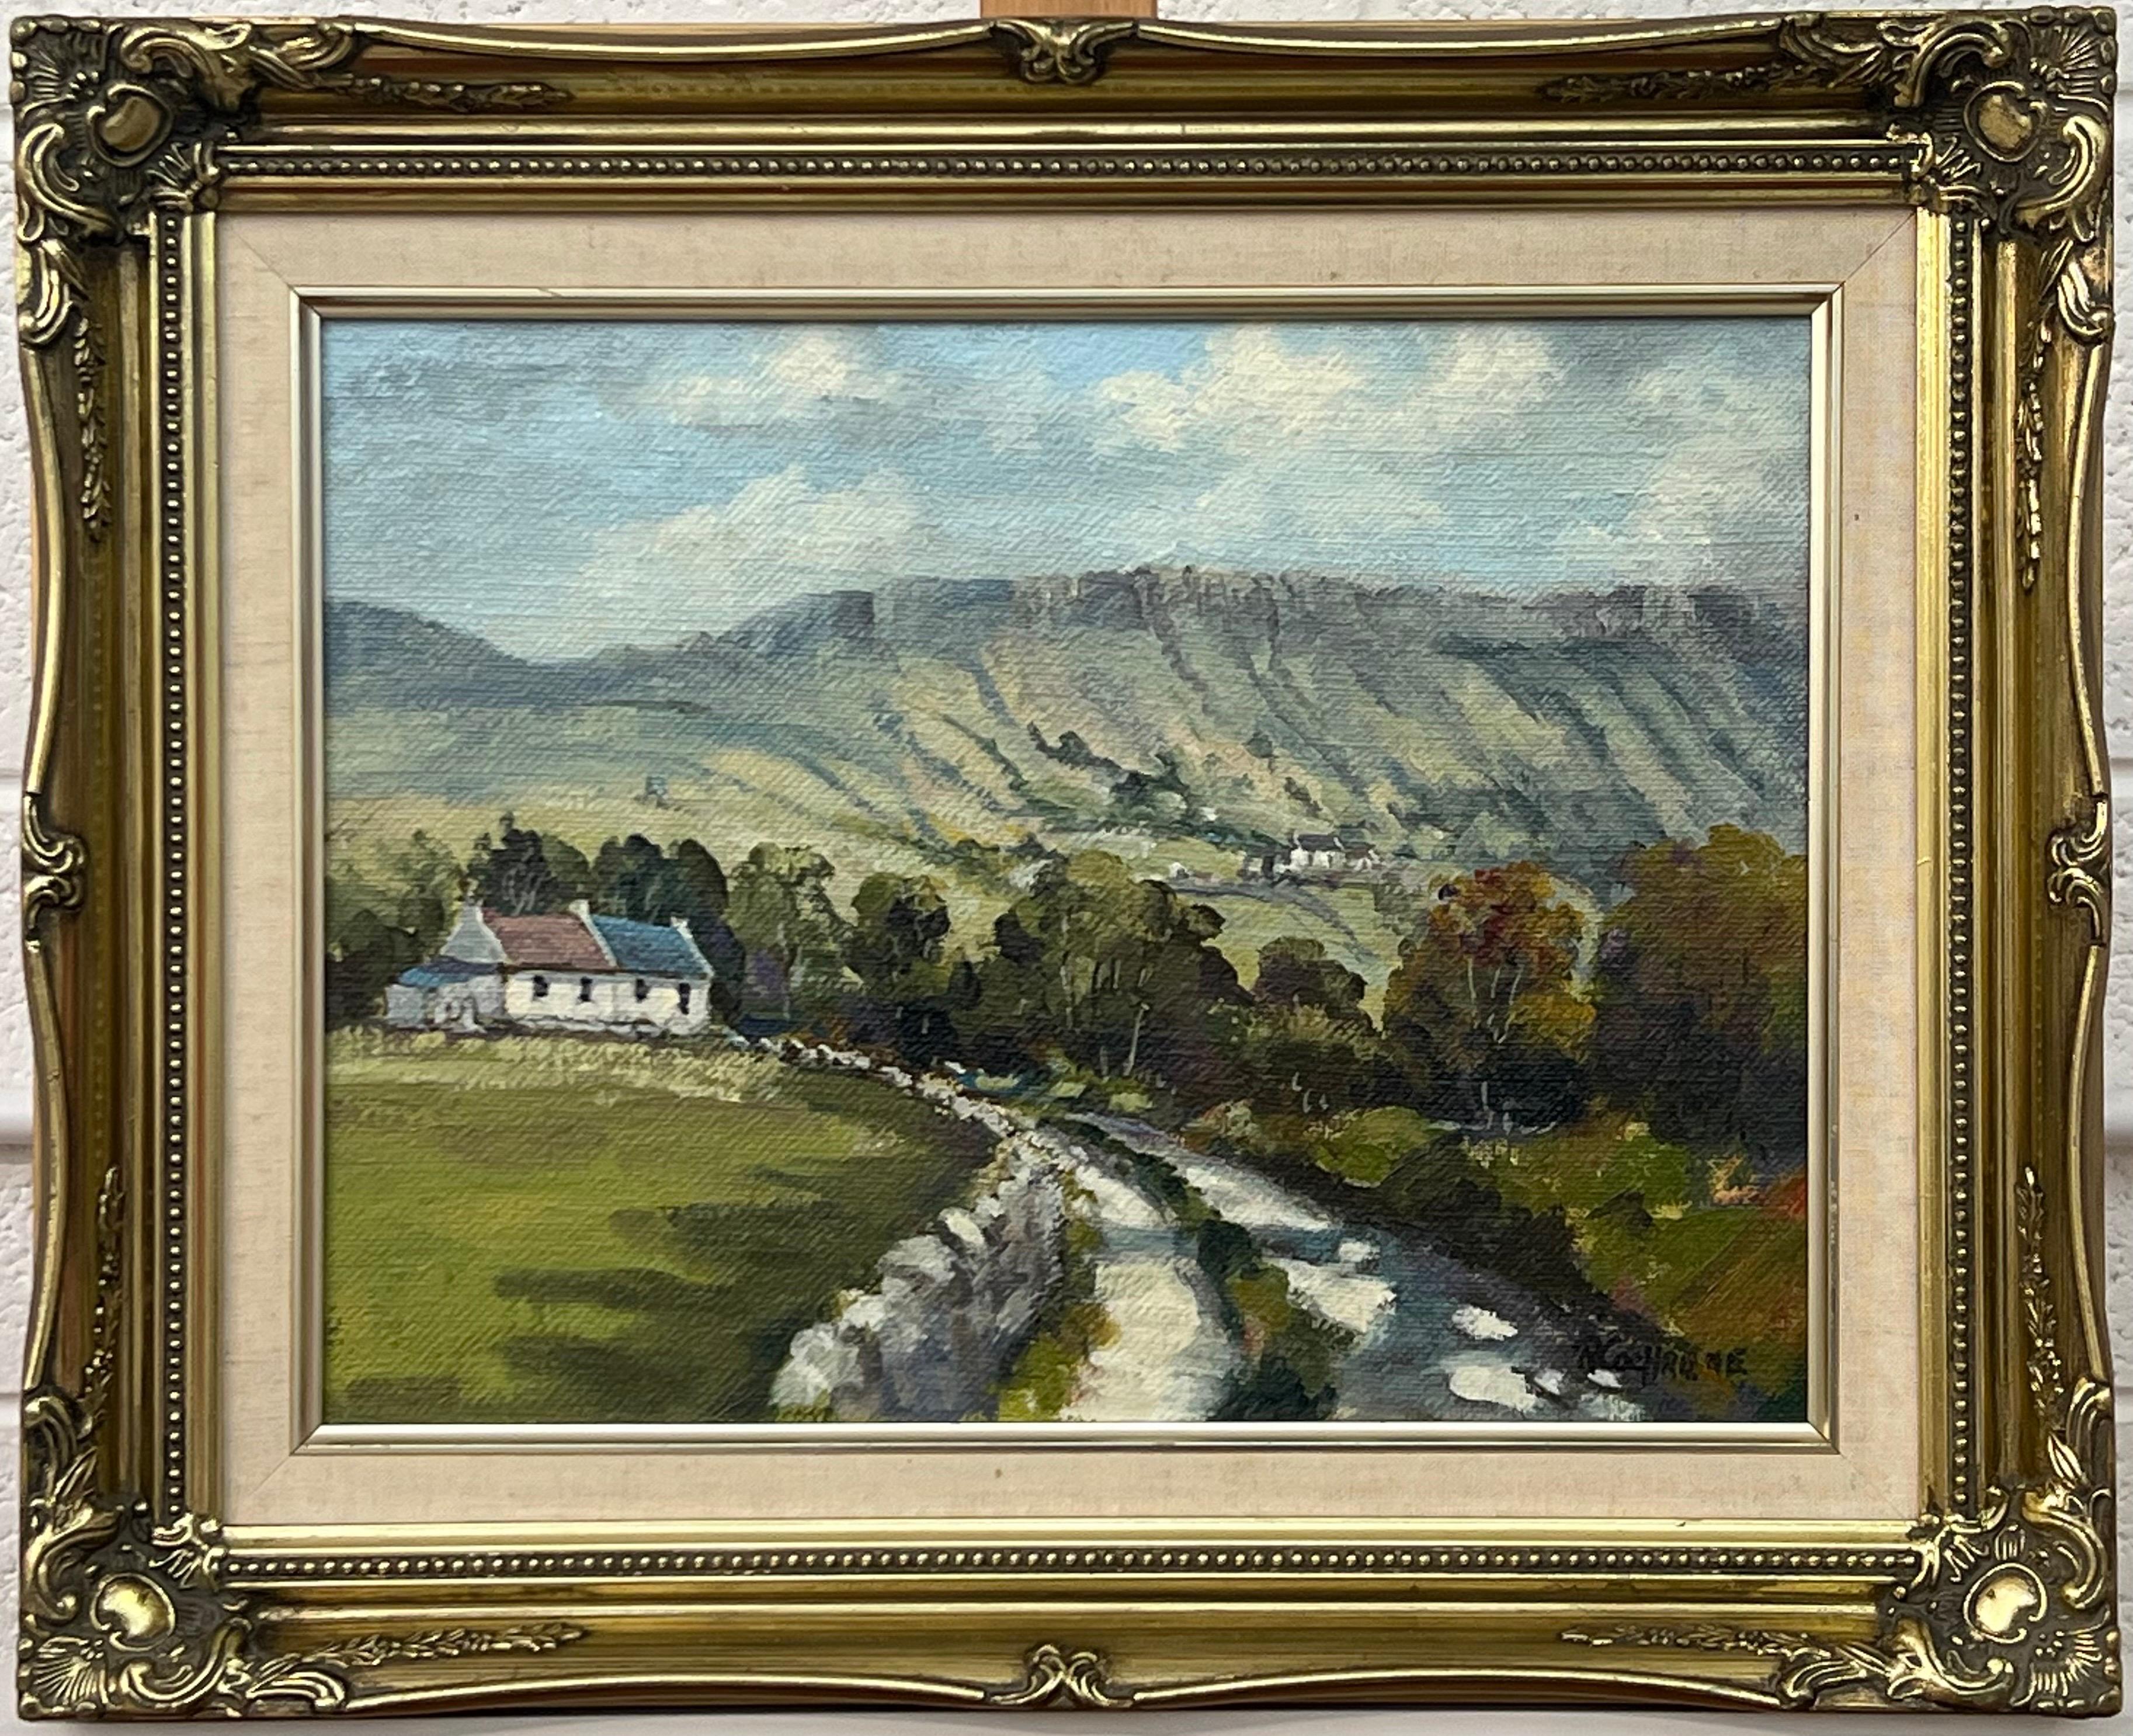 Ray Cochrane Figurative Painting - Vintage Post-Impressionist Oil Painting of Ireland Countryside by Irish Artist